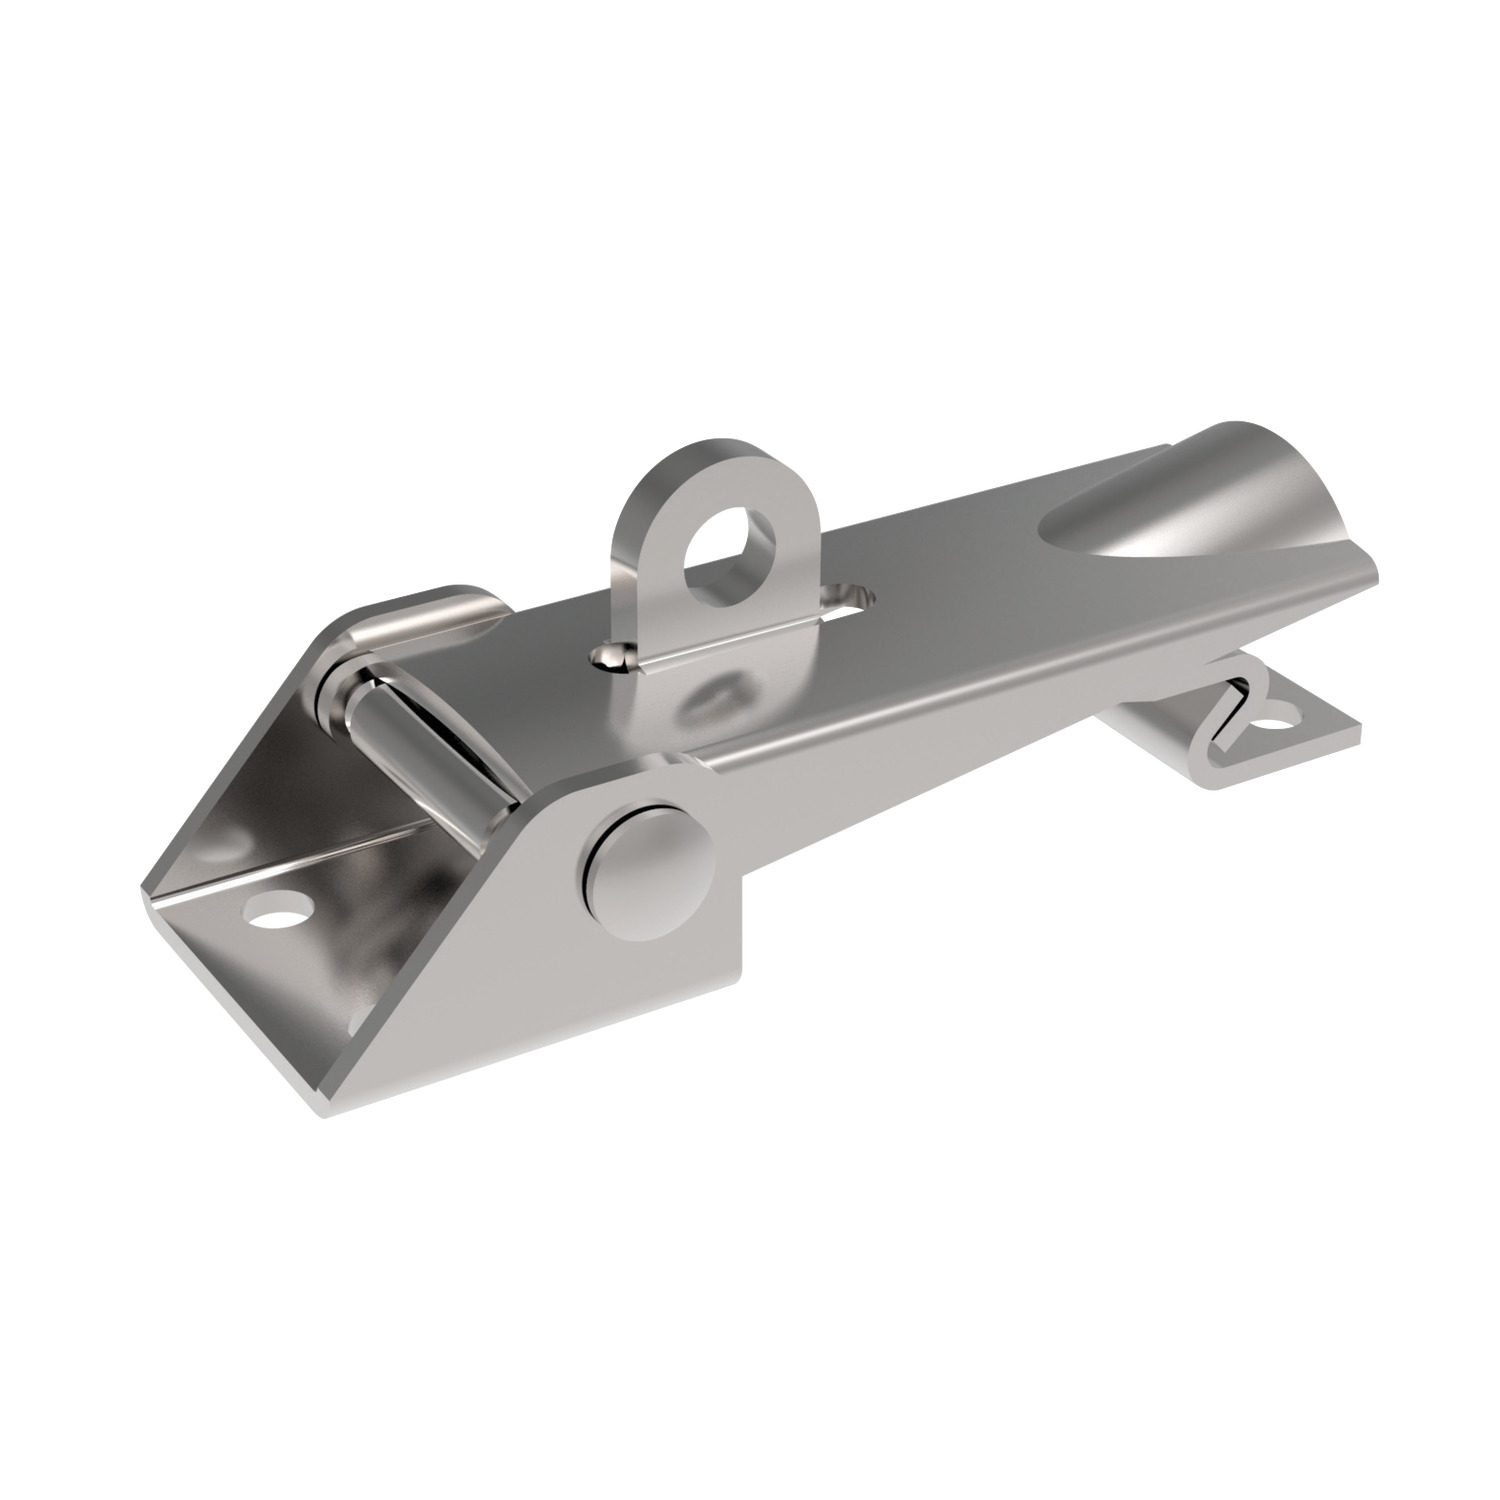 Toggle Latches Available in steel or stainless steel, an adjustable toggle latch giving up to 10mm of adjustment by turning of a threaded draw rod. The shackle allows attachment of a padlock of up to 6mm diatmeter